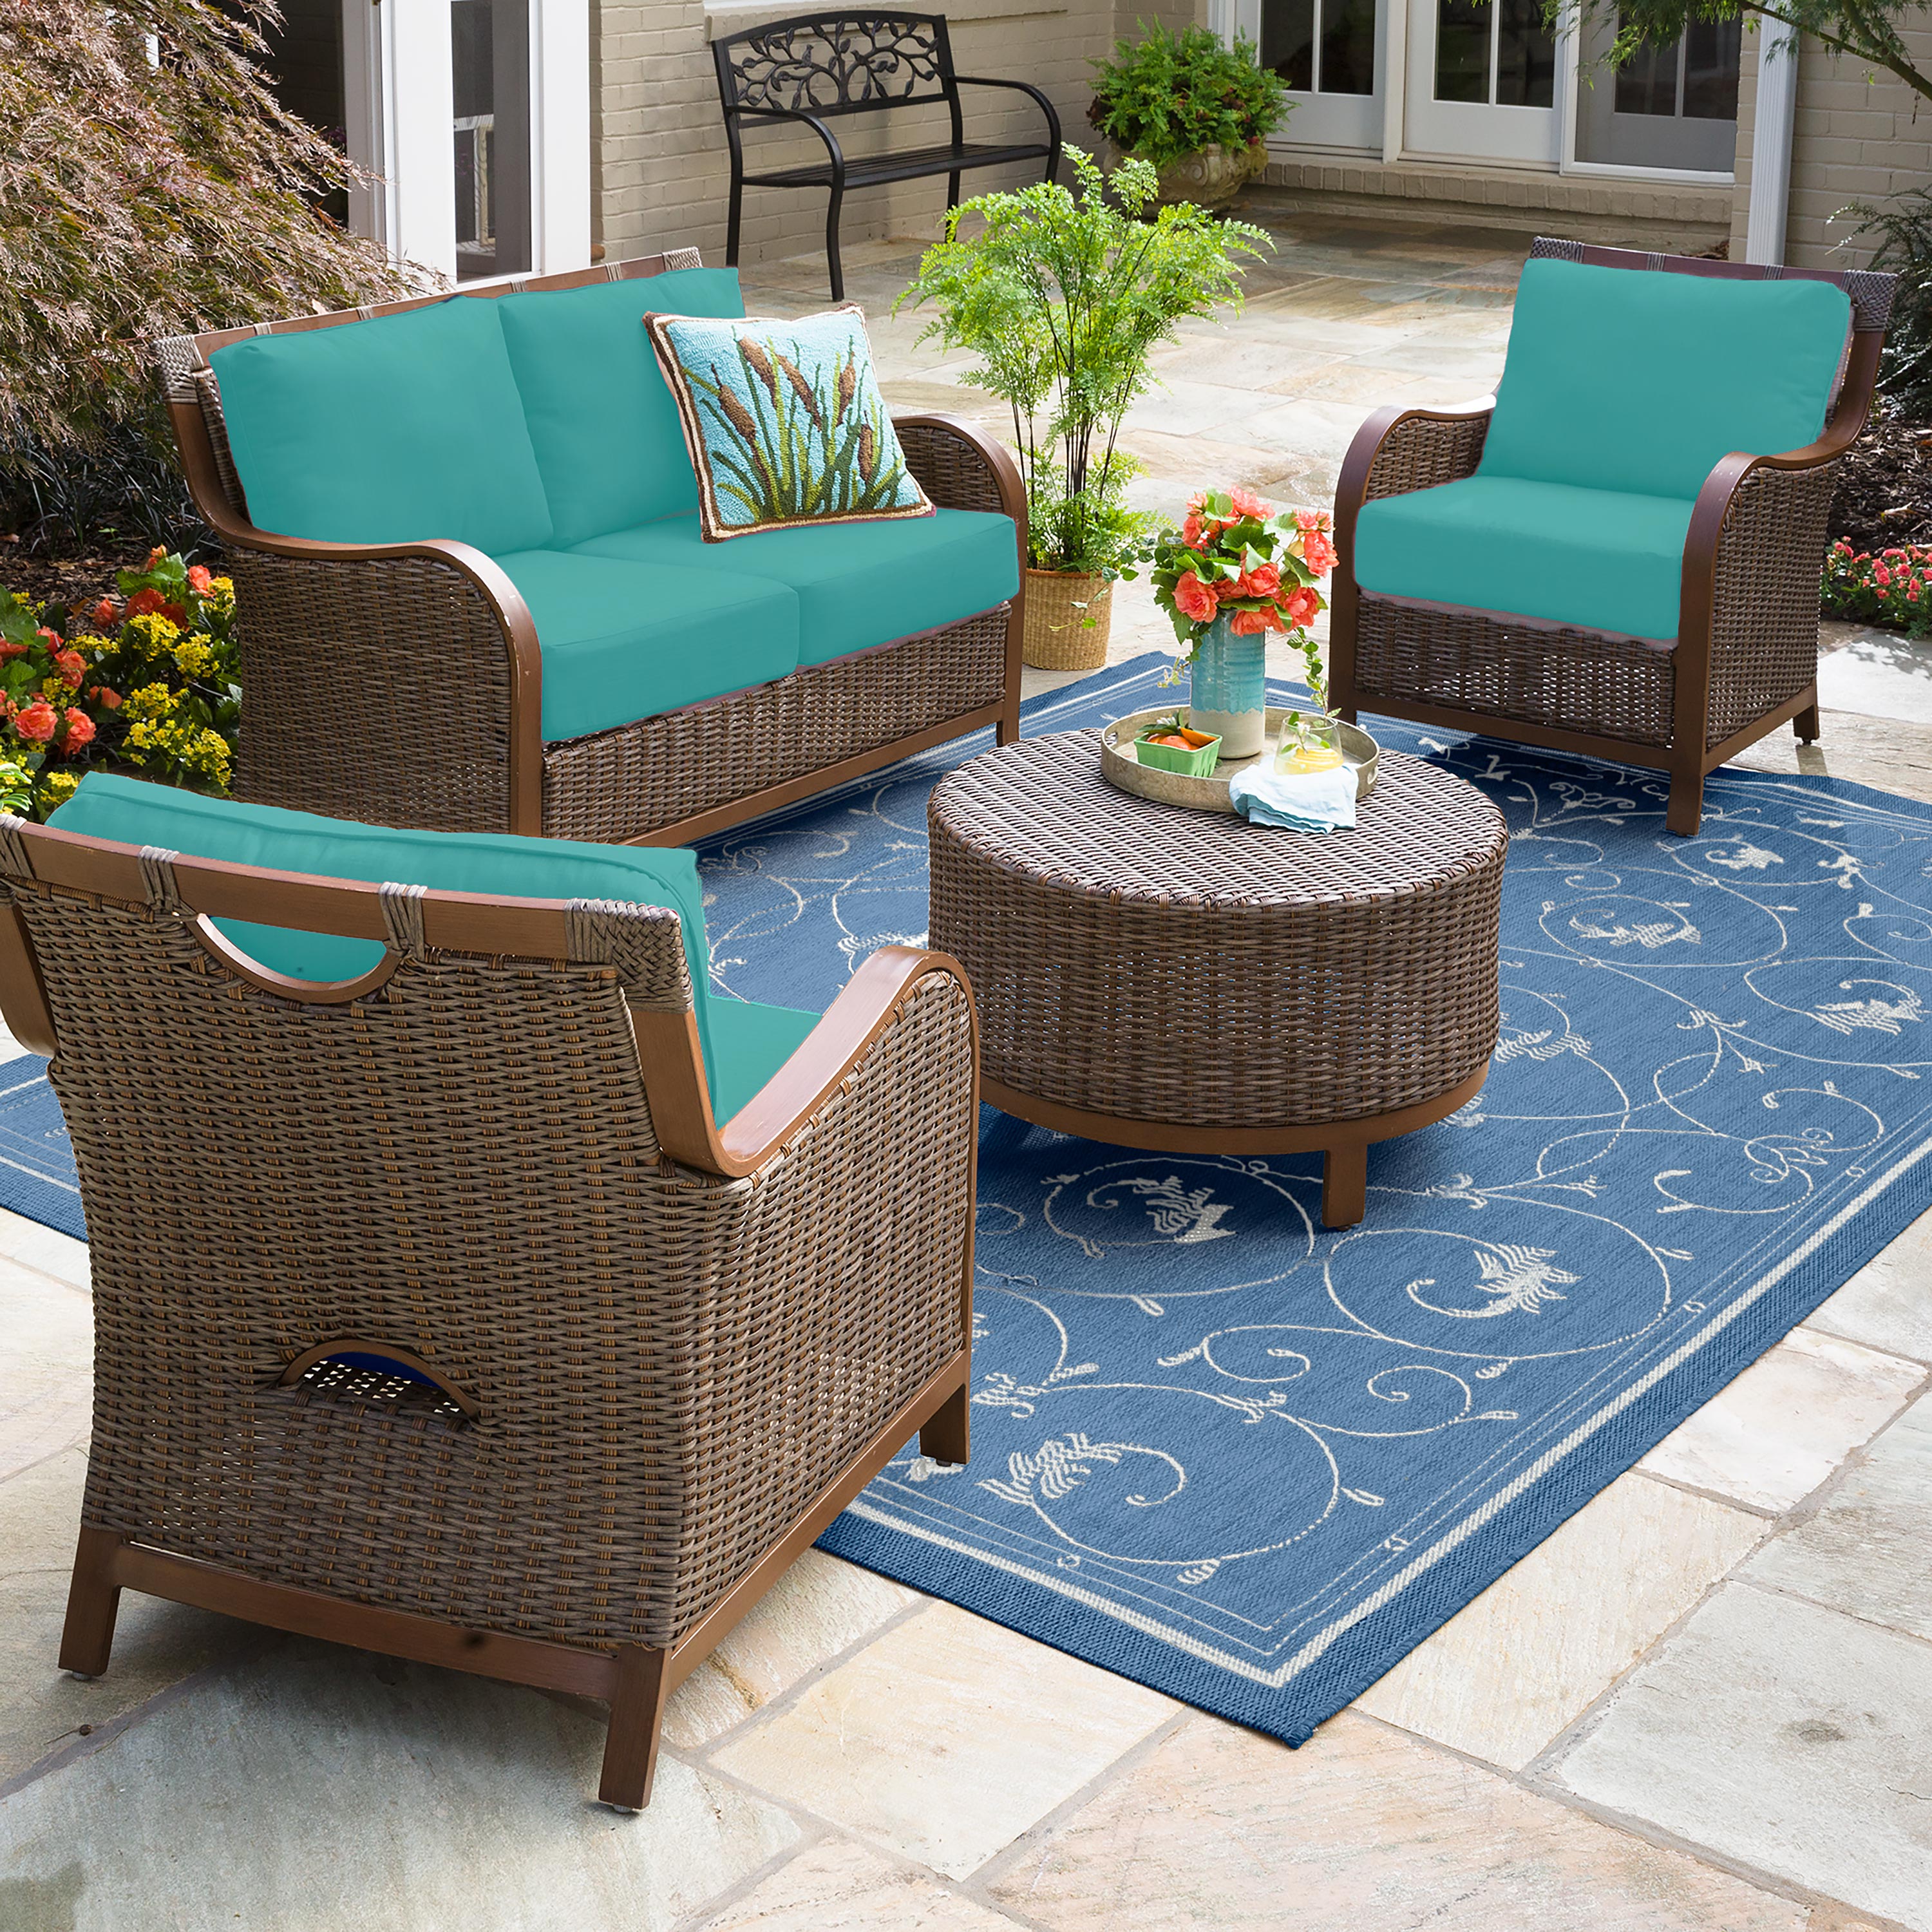 Urbanna Premium Wicker Collection with Luxury Cushions